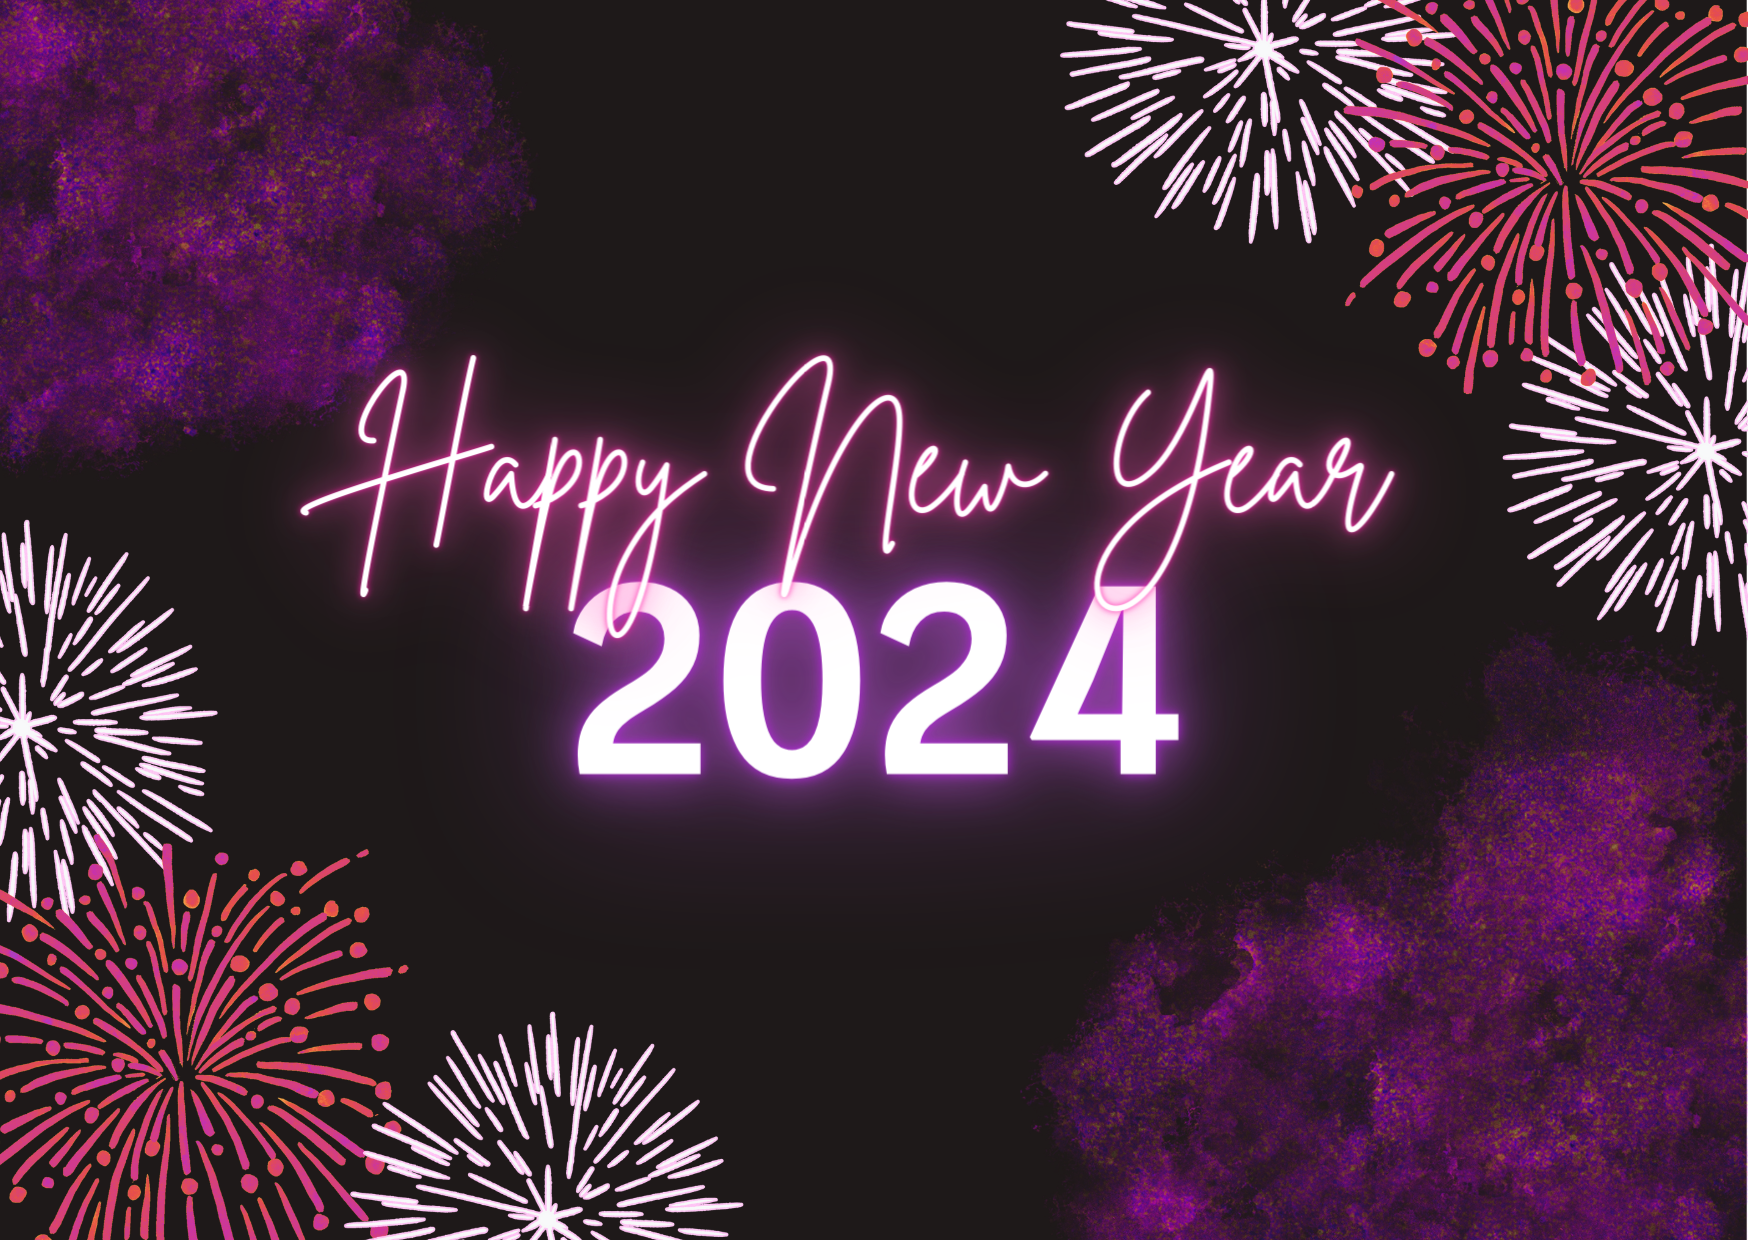 The Pharmya team wishes you a happy and prosperous 2024!